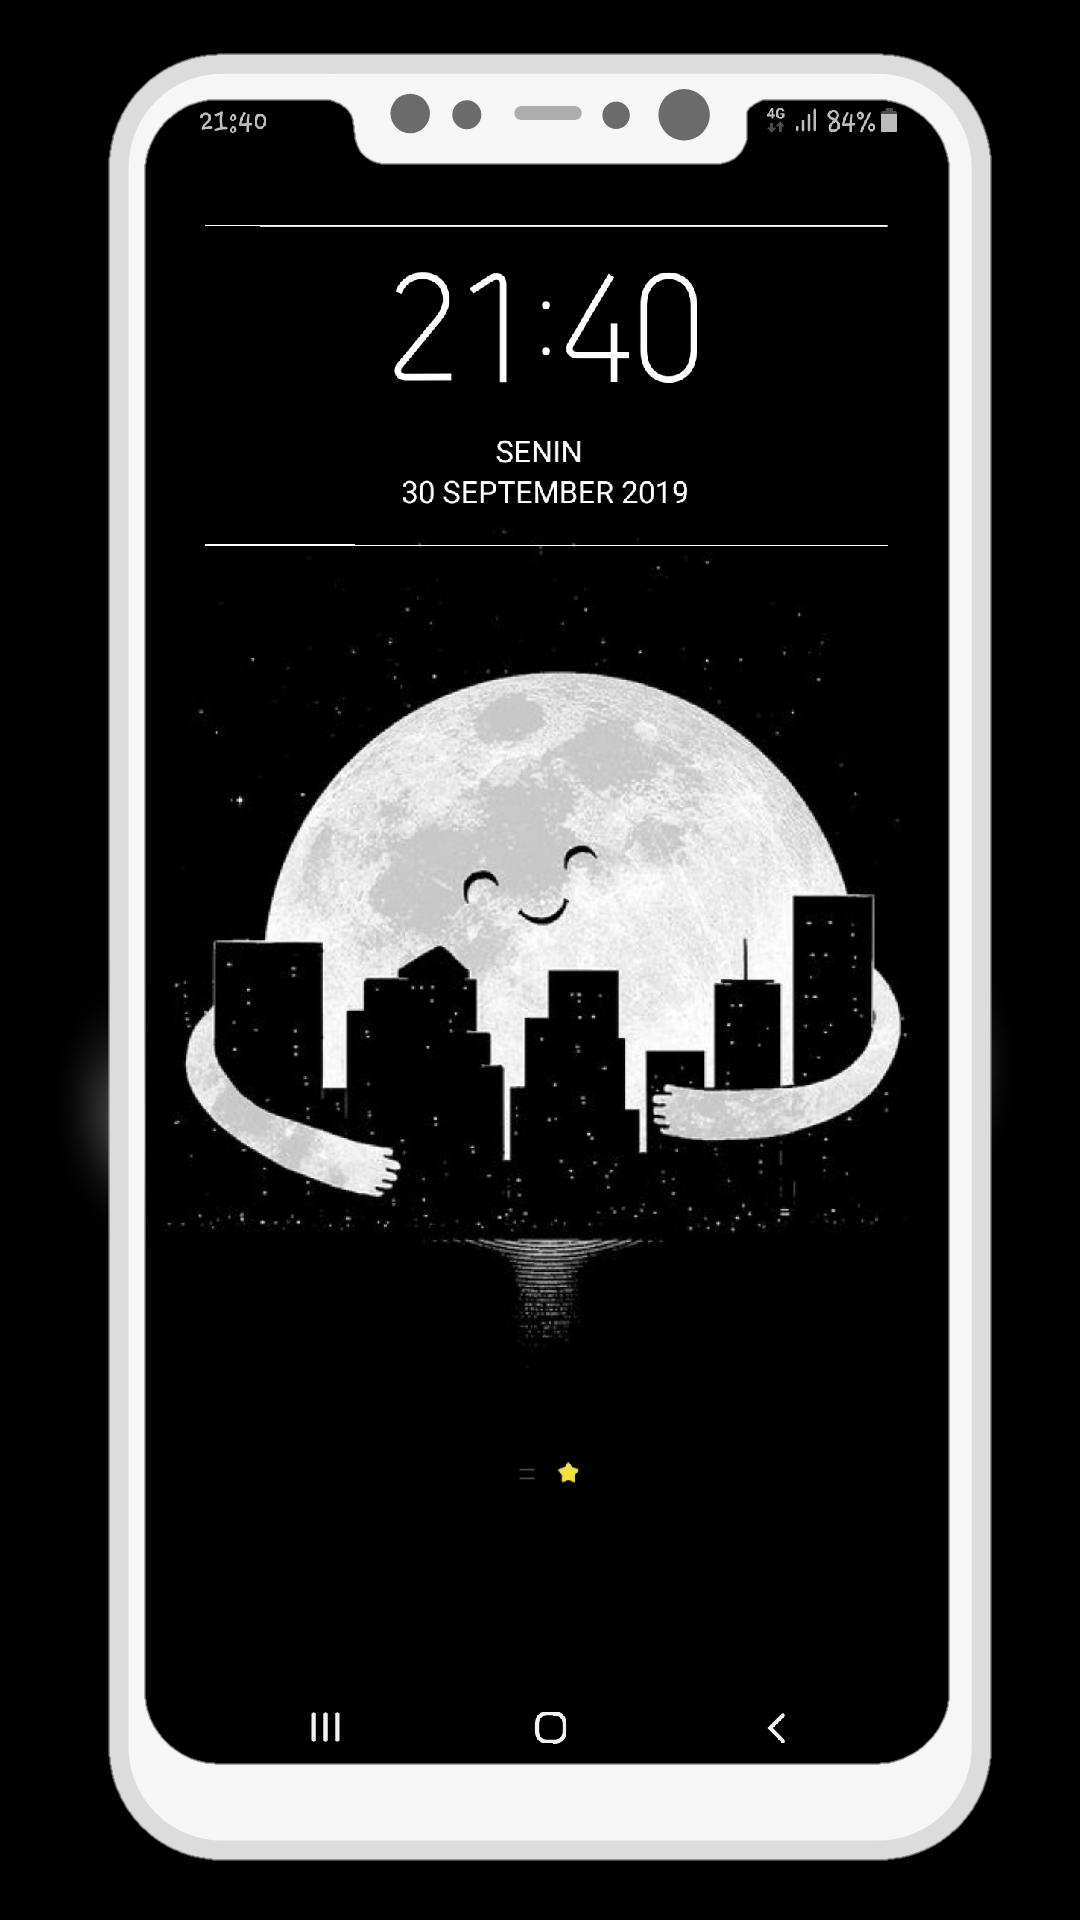  Black  AMOLED  Wallpaper  for Android APK  Download 